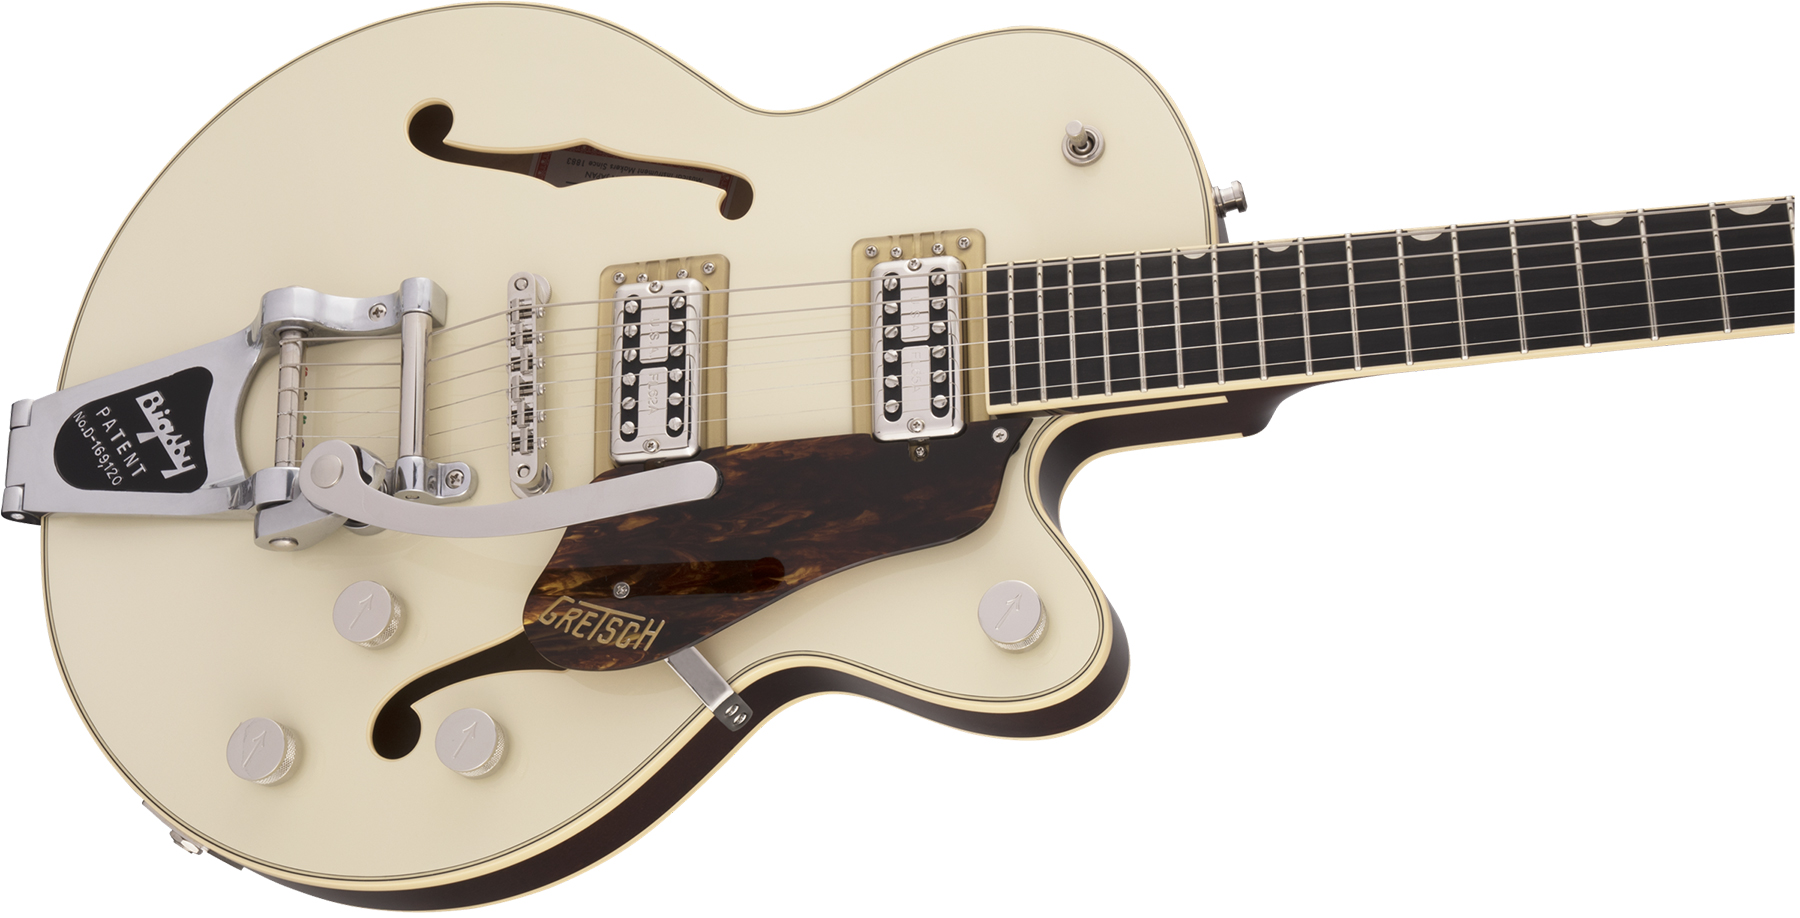 Gretsch G6659t Broadkaster Jr Center Bloc Players Edition Nashville Pro Japon Bigsby Eb - Two-tone Lotus Ivory/walnut Stain - Semi hollow elektriche g